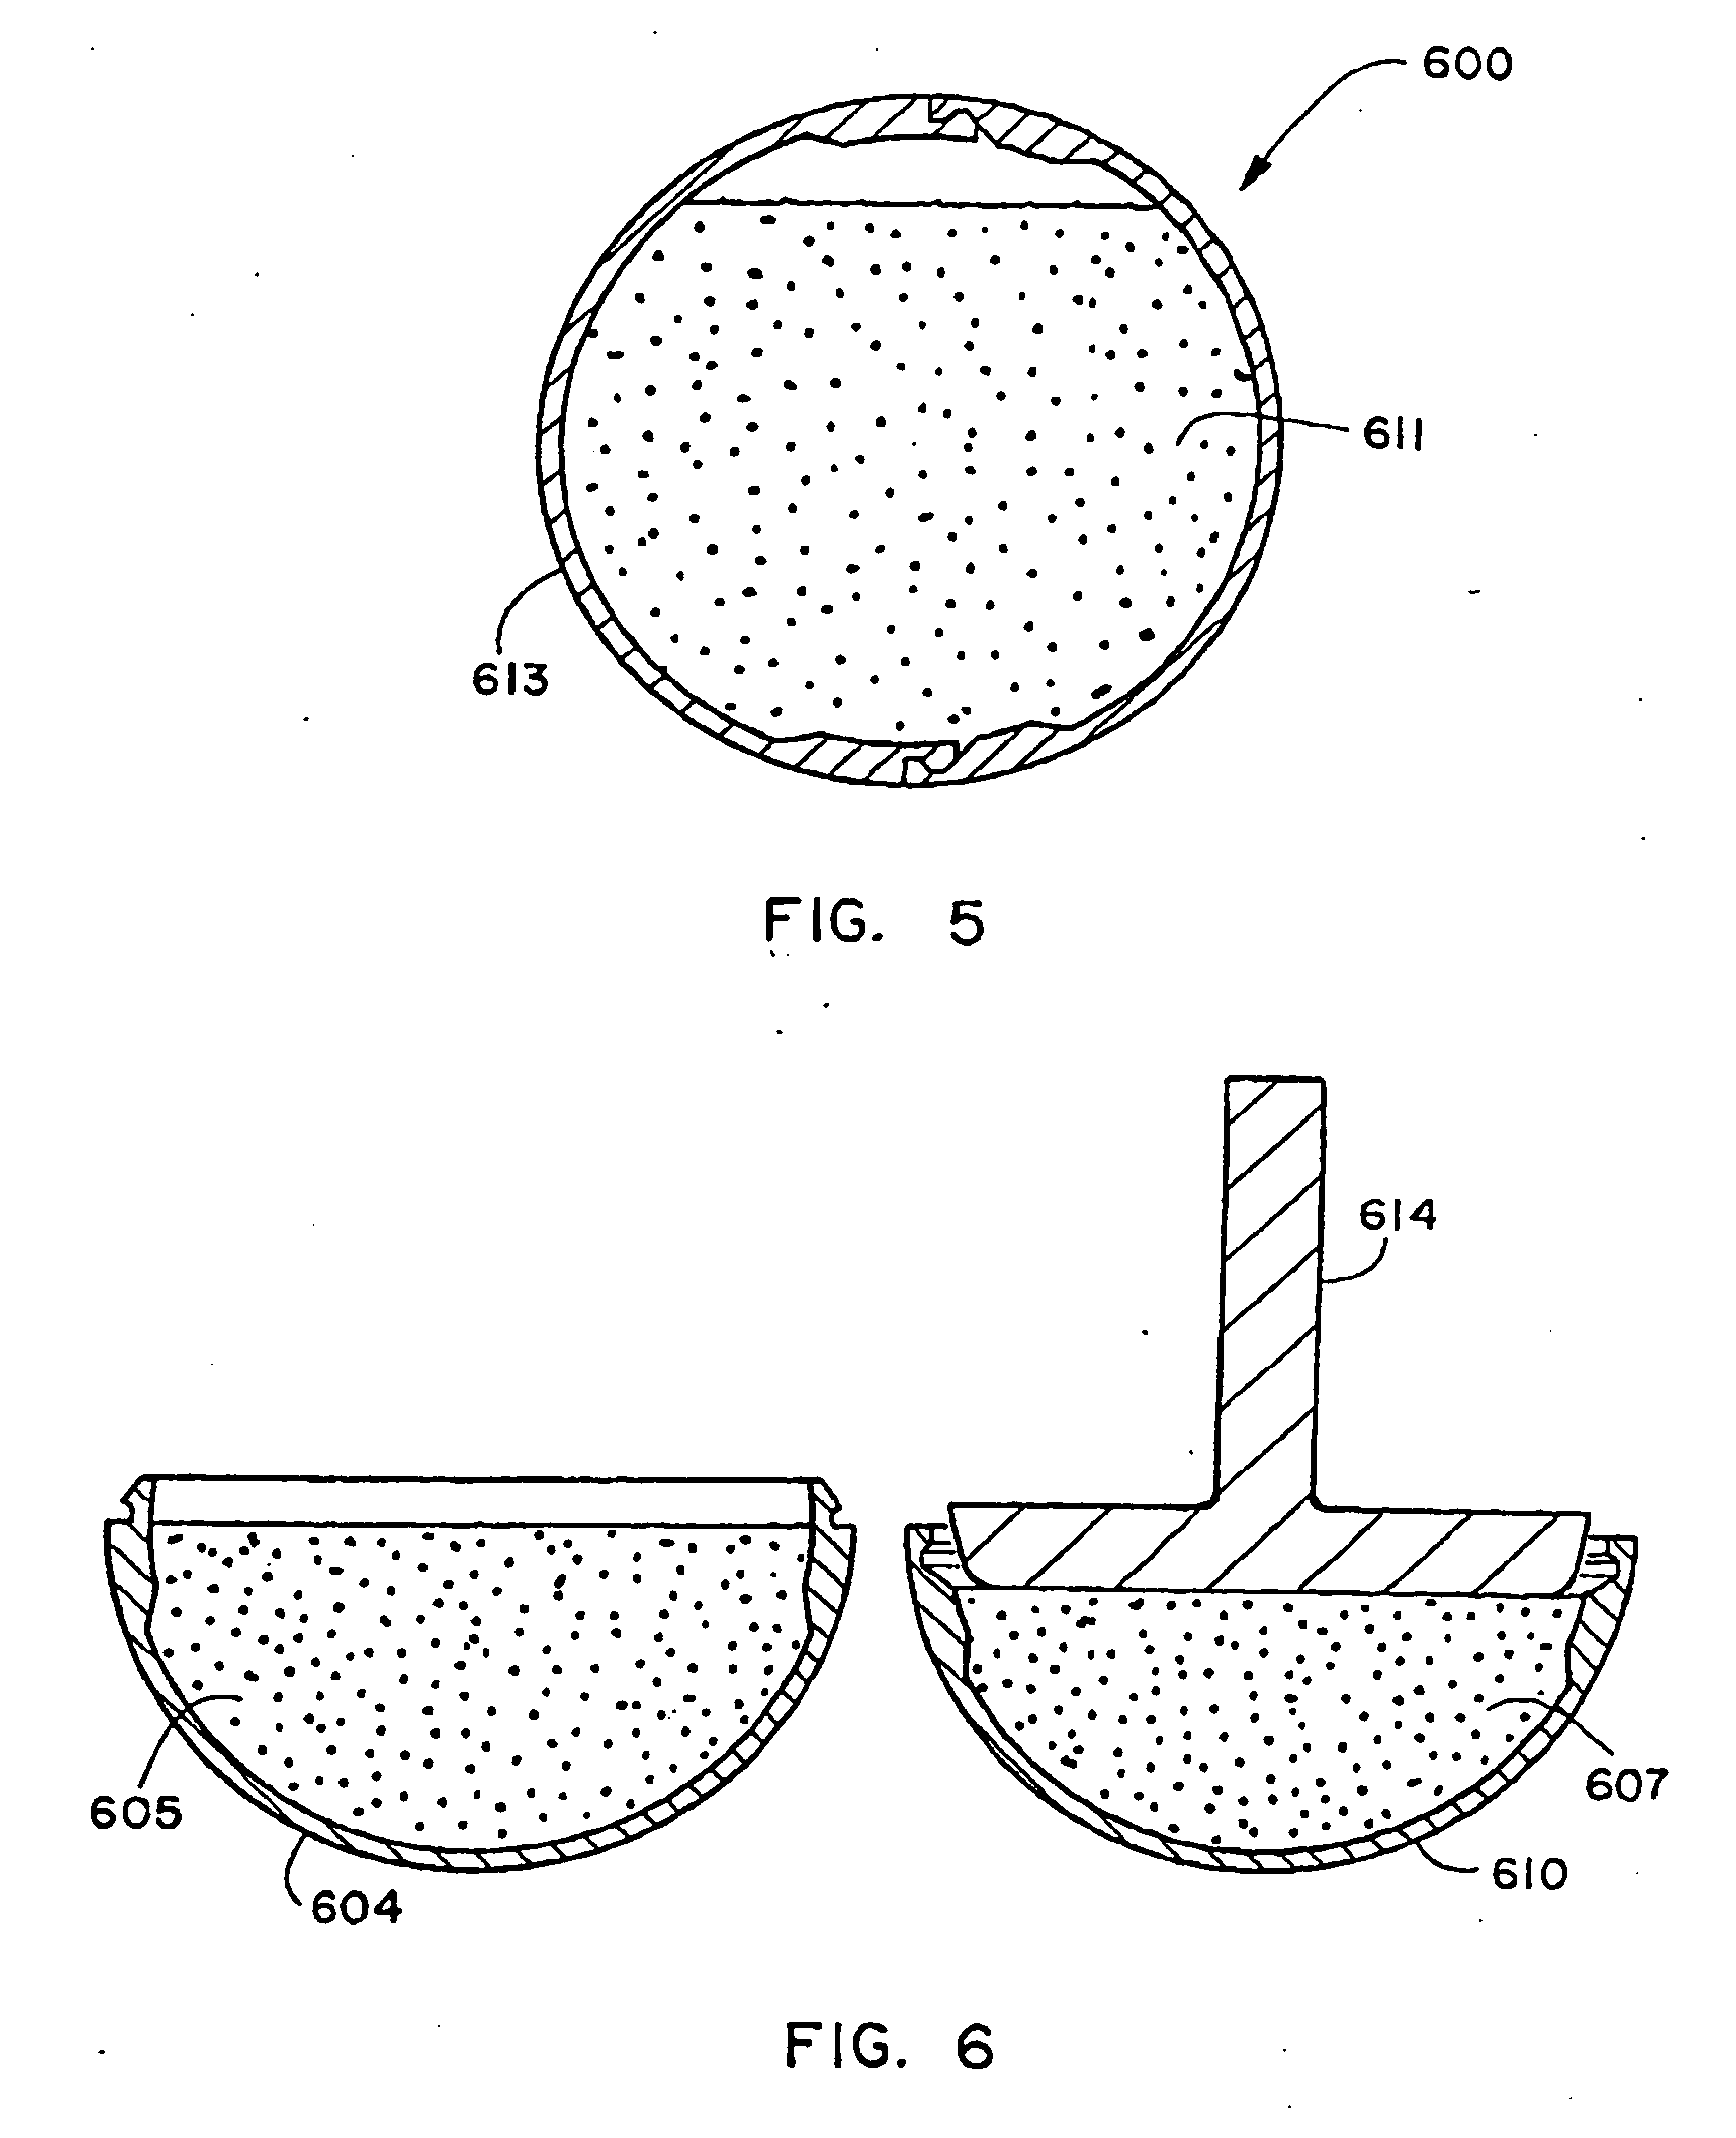 Non-lethal projectiles for delivering an inhibiting substance to a living target